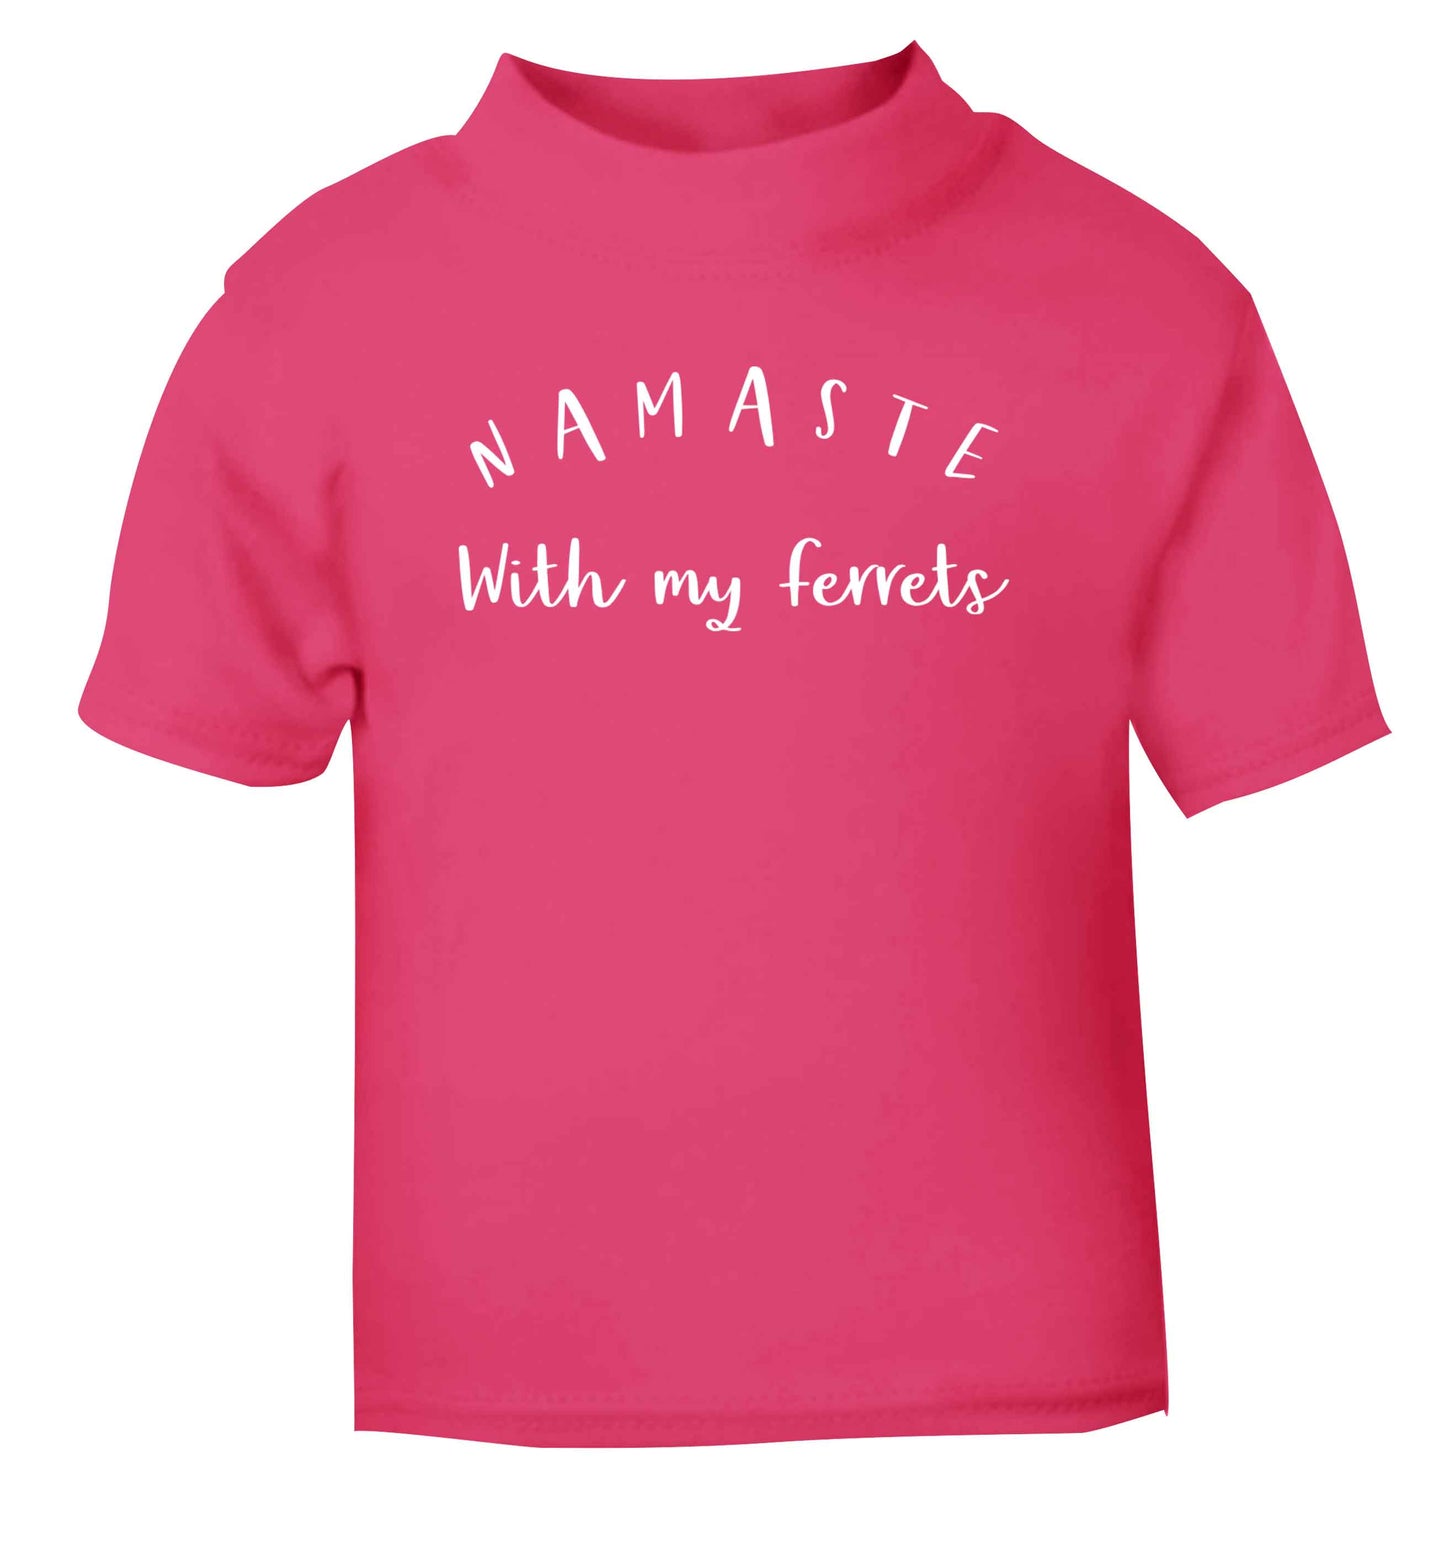 Namaste with my ferrets pink Baby Toddler Tshirt 2 Years